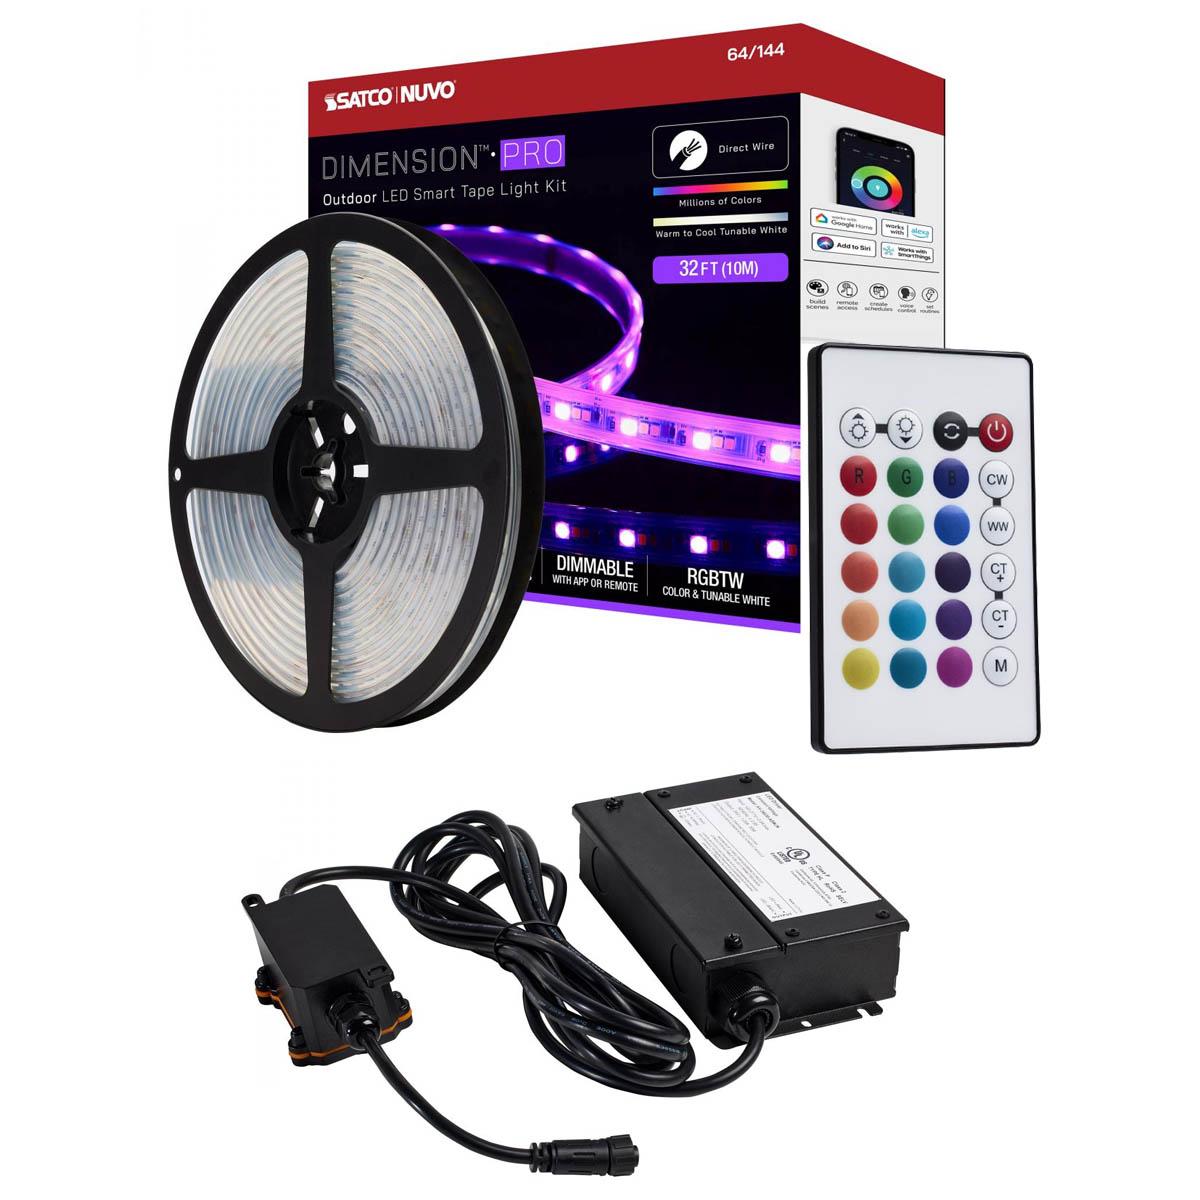 Dimension Pro Outdoor Smart LED Tape Light Kit with Remote, 32ft Reel, Color Changing RGB and Tunable White, 24V, J-Box Connection